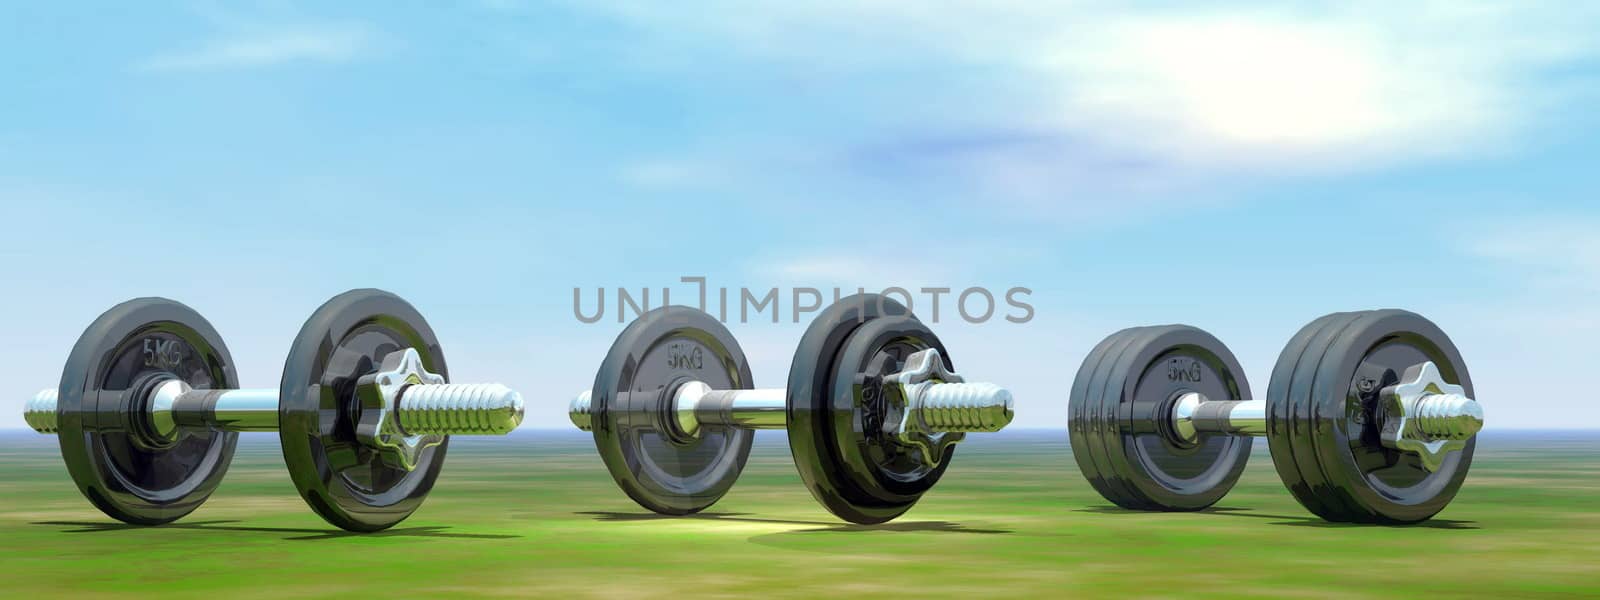 Three different dumbbells on the grass by beautiful day